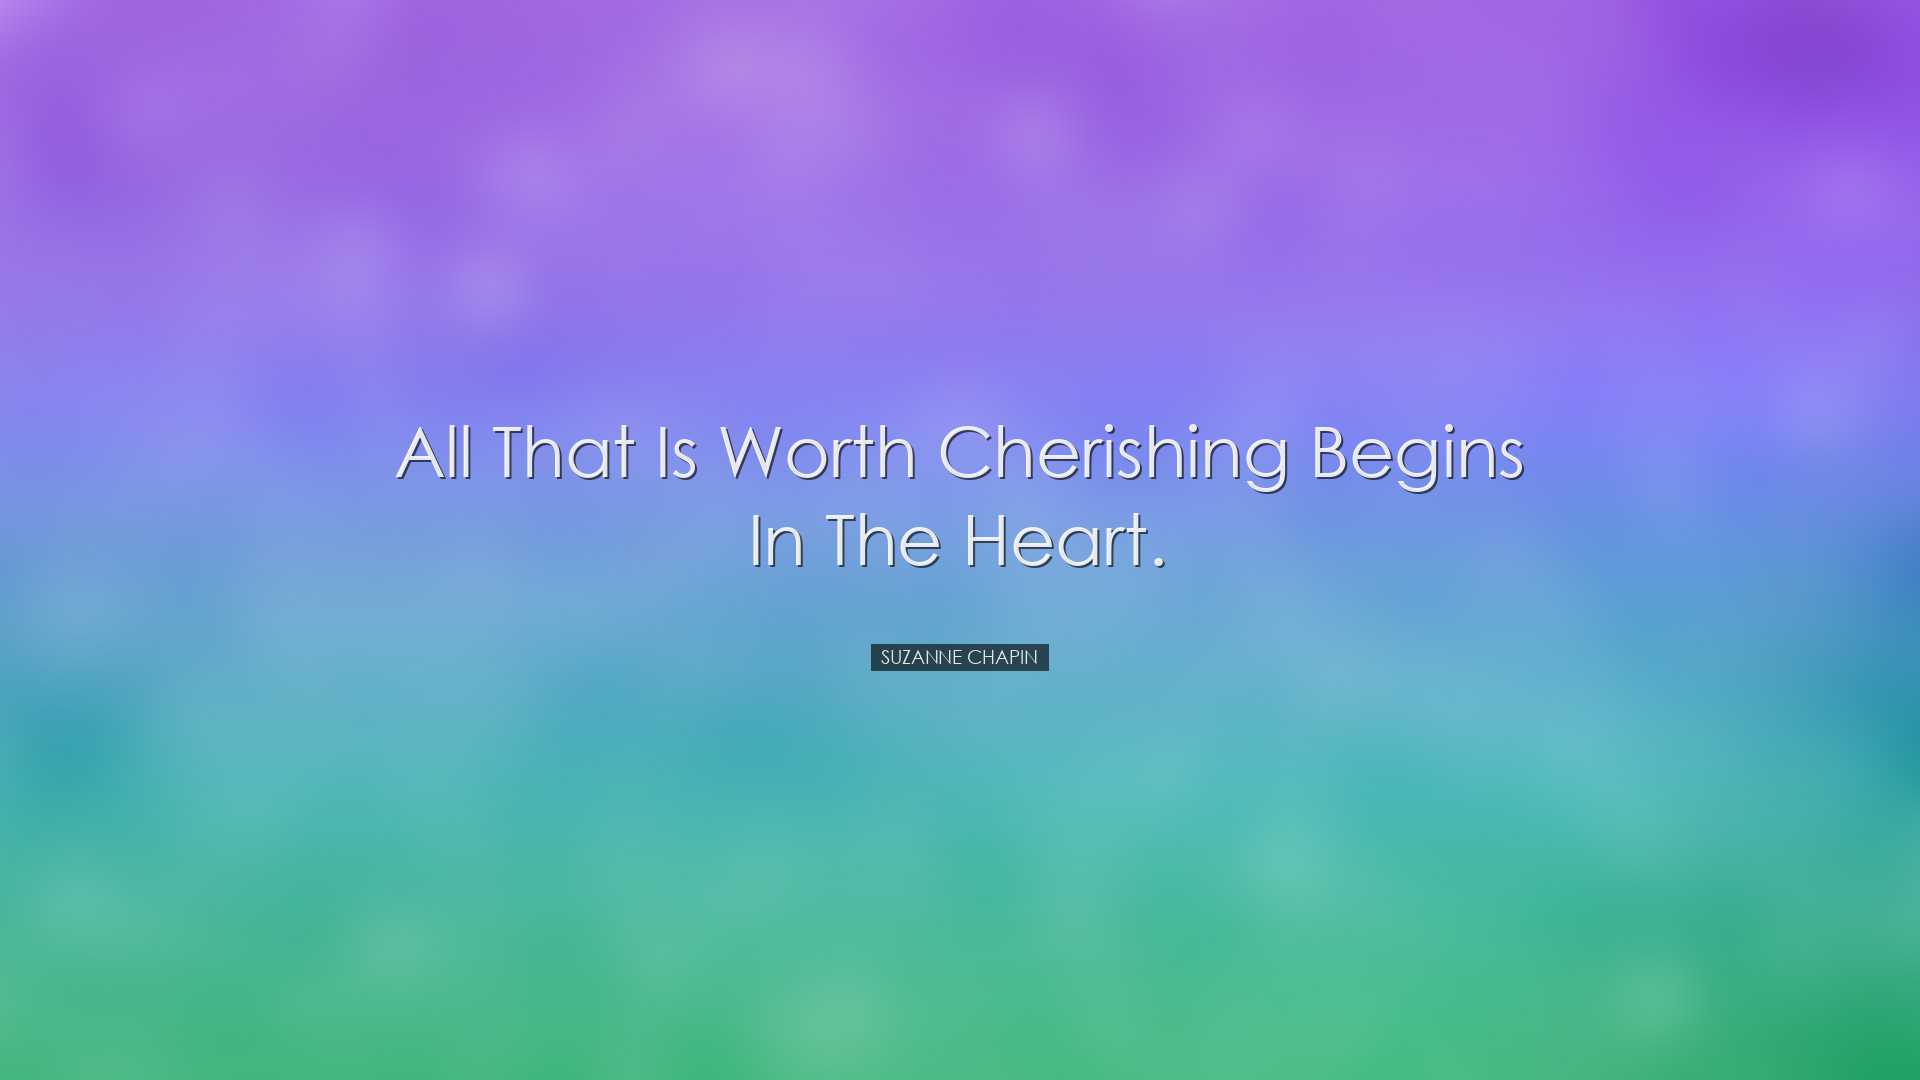 All that is worth cherishing begins in the heart. - Suzanne Chapin